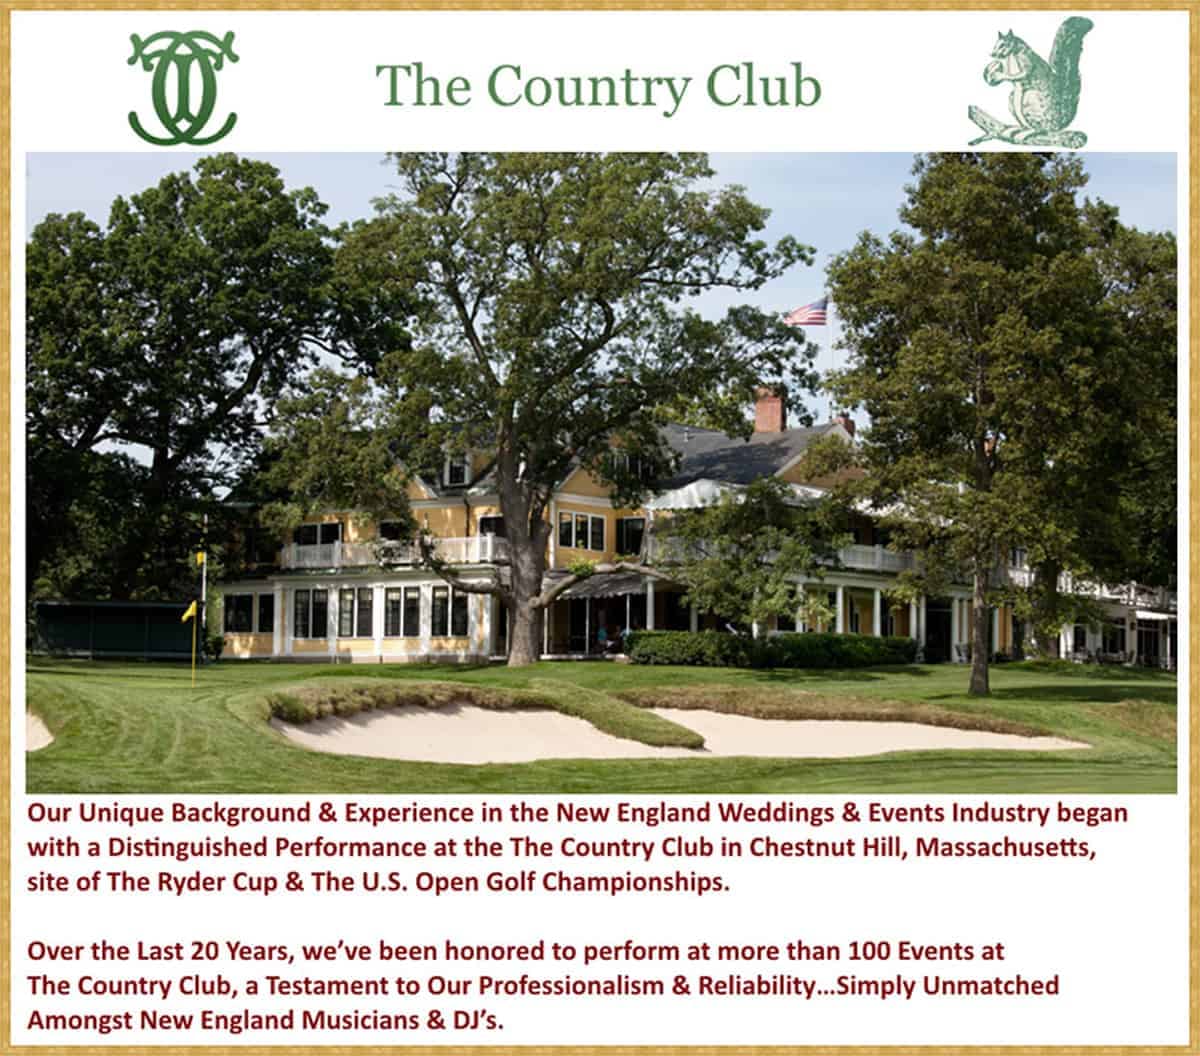 Aaron-Topfer-The-Country-Club-1-1